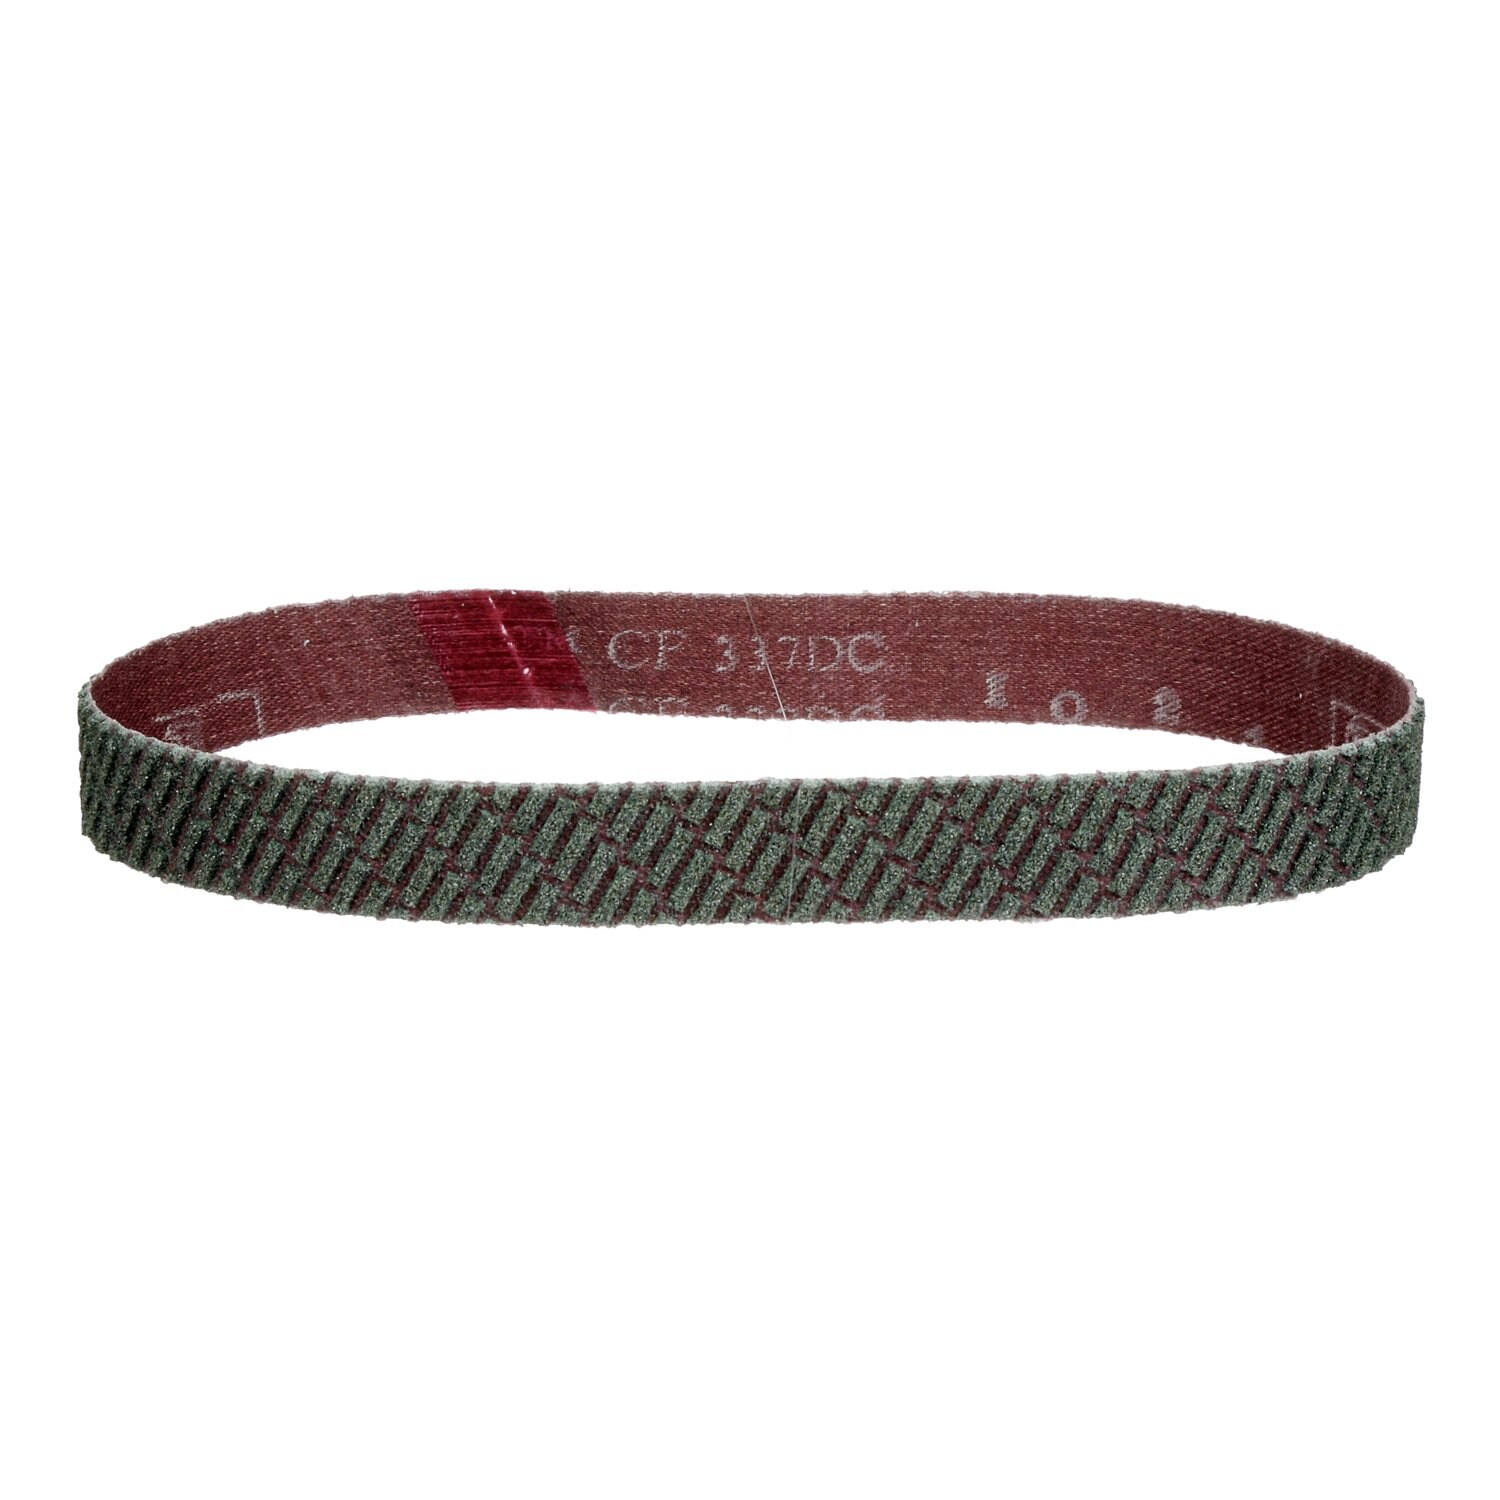 00638060699614 | 3M Trizact Cloth Belt 337DC, A160 X-weight, 2 in